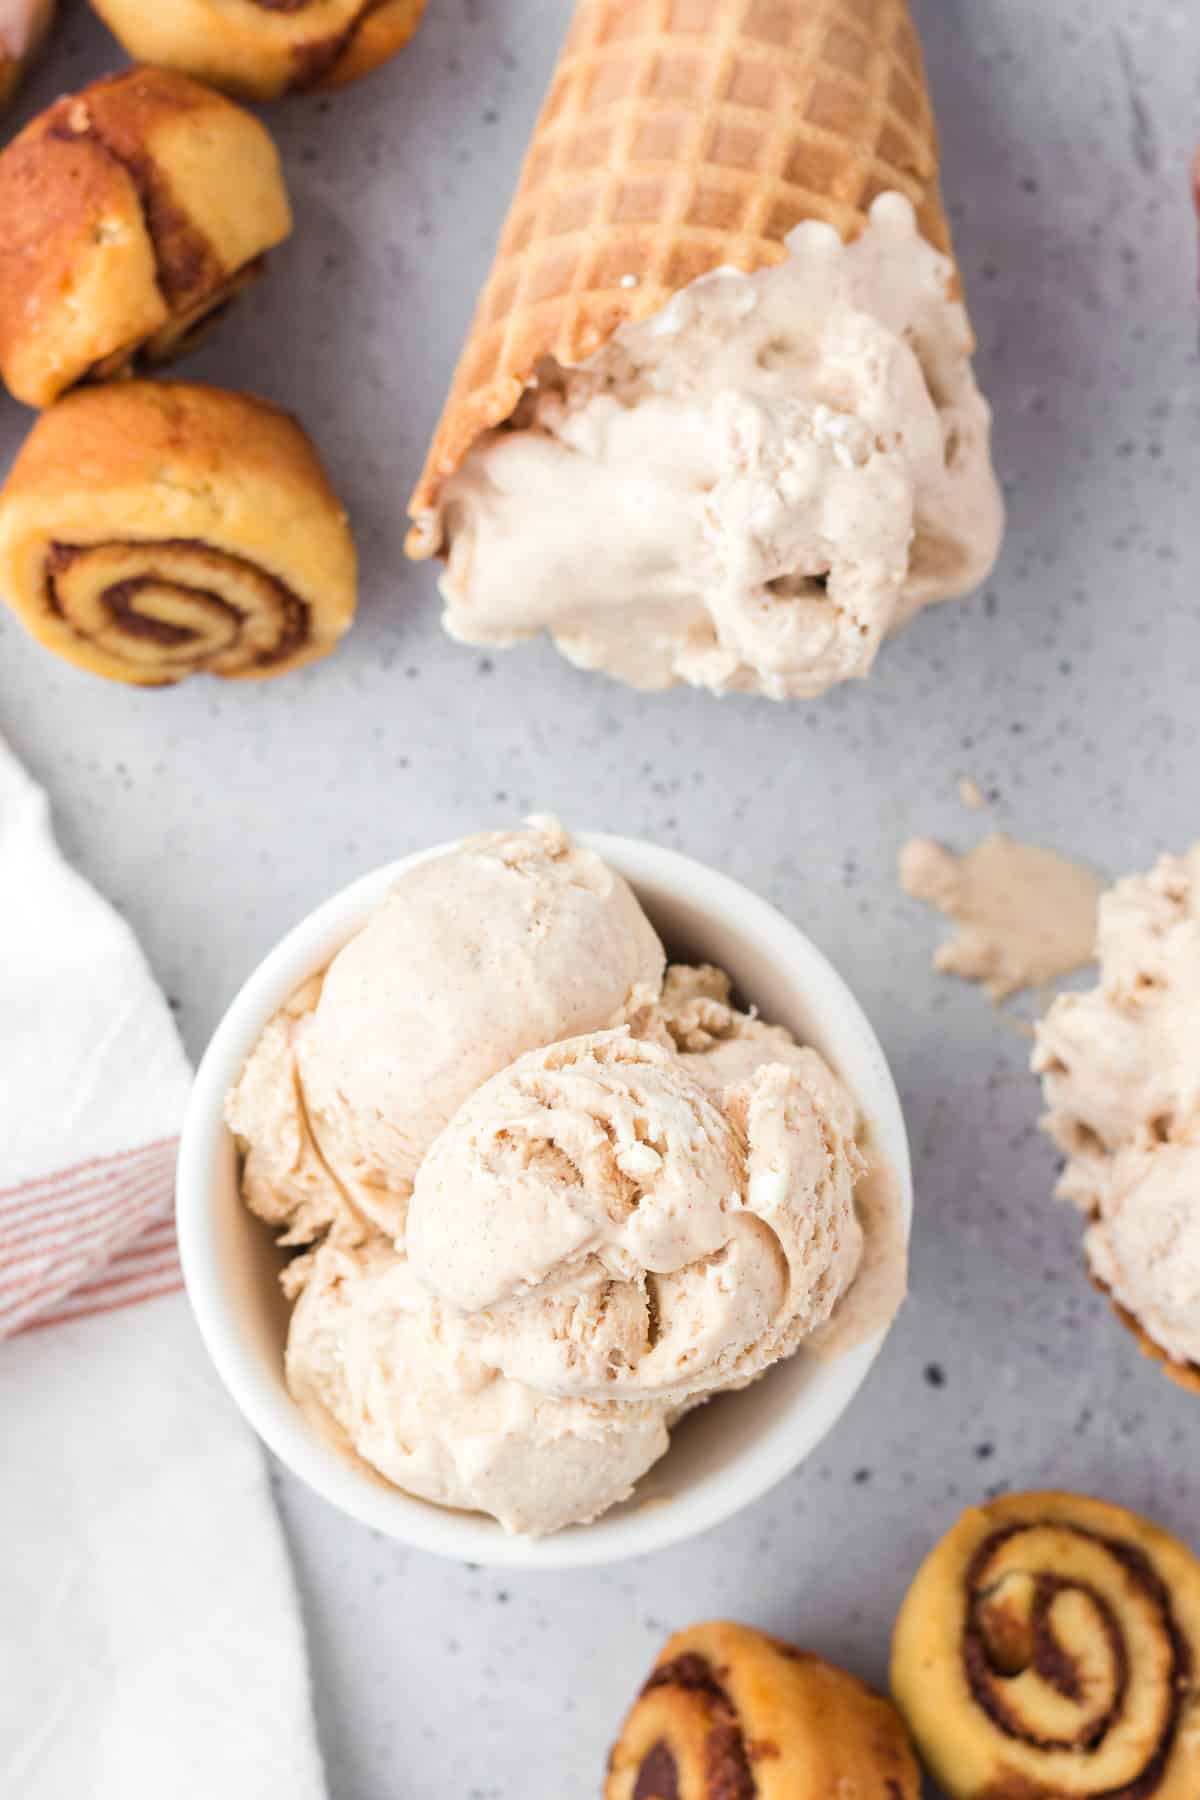 Cinnamon ice cream in a bowl with cones of ice cream and cinnamon rolls around it.